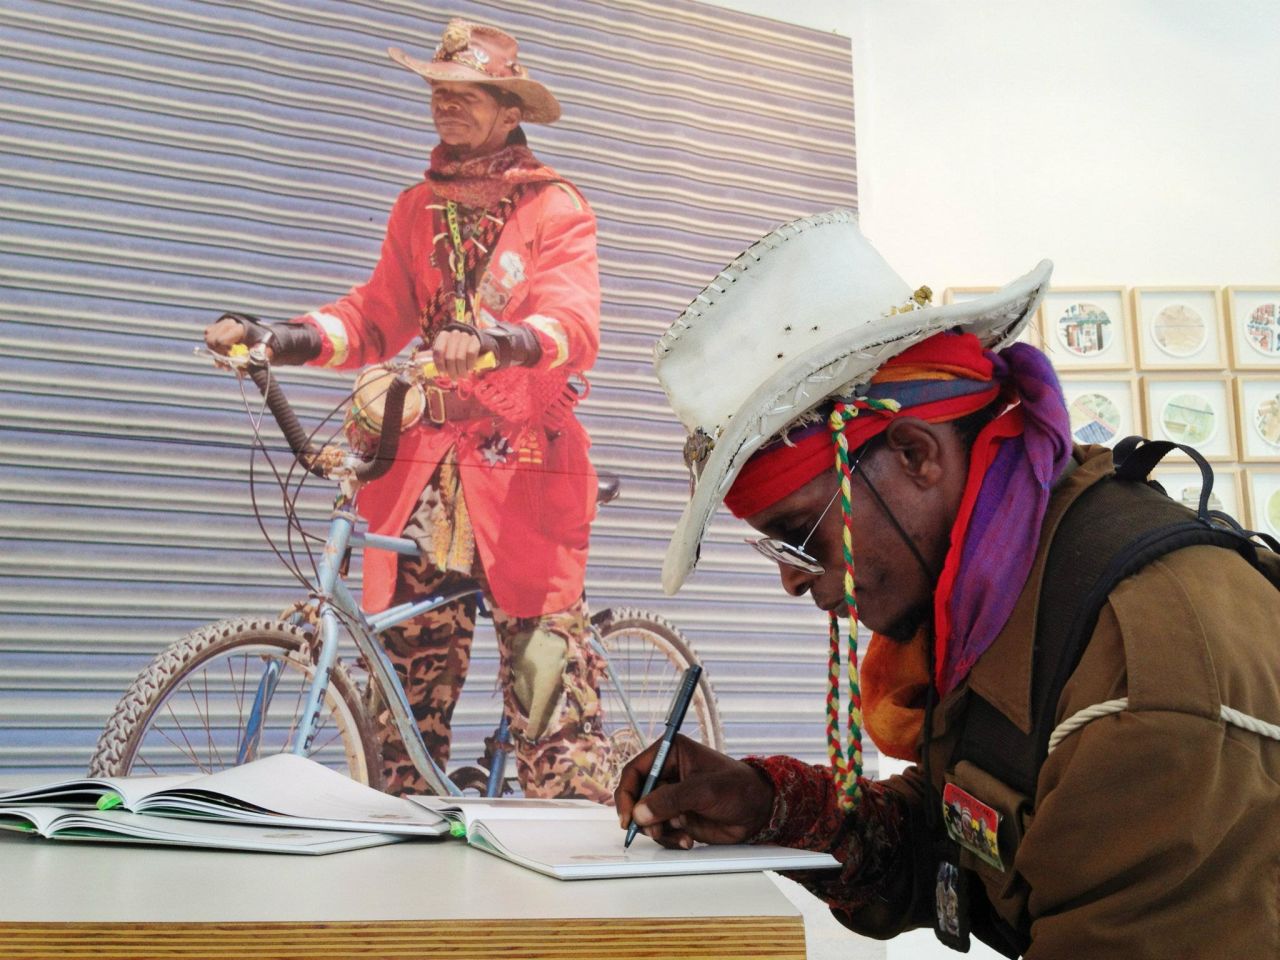 Asher Tafara signing the "Bicycle Portraits" book he appears in.